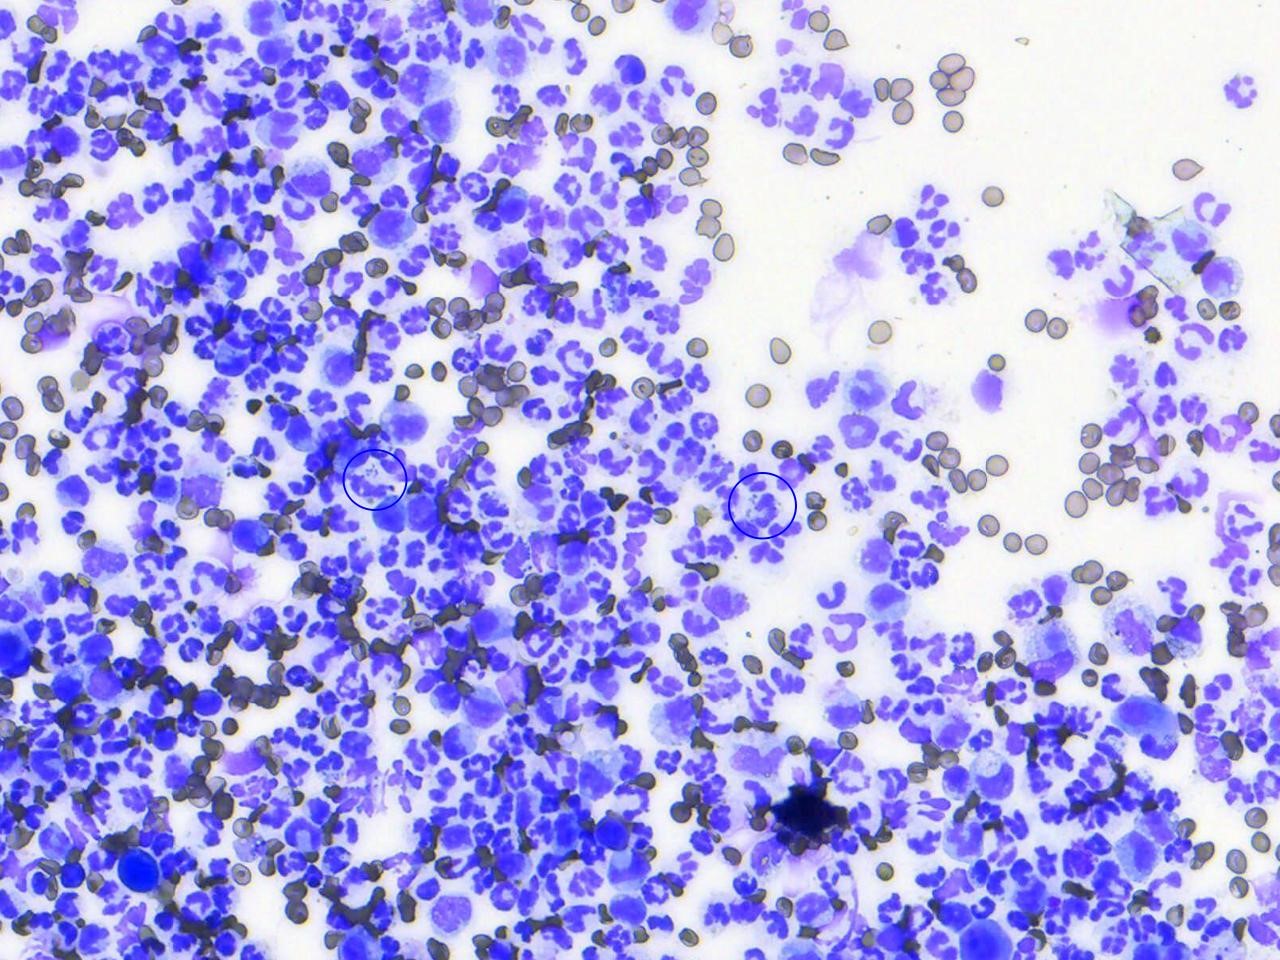 Fine-needle aspirates from an abscess in a dog. In this image, you can see that there is marked suppurative inflammation characterized by many degenerate neutrophils and low numbers of macrophages. Degenerate neutrophils containing phagocytized bacteria are circled. 100x objective